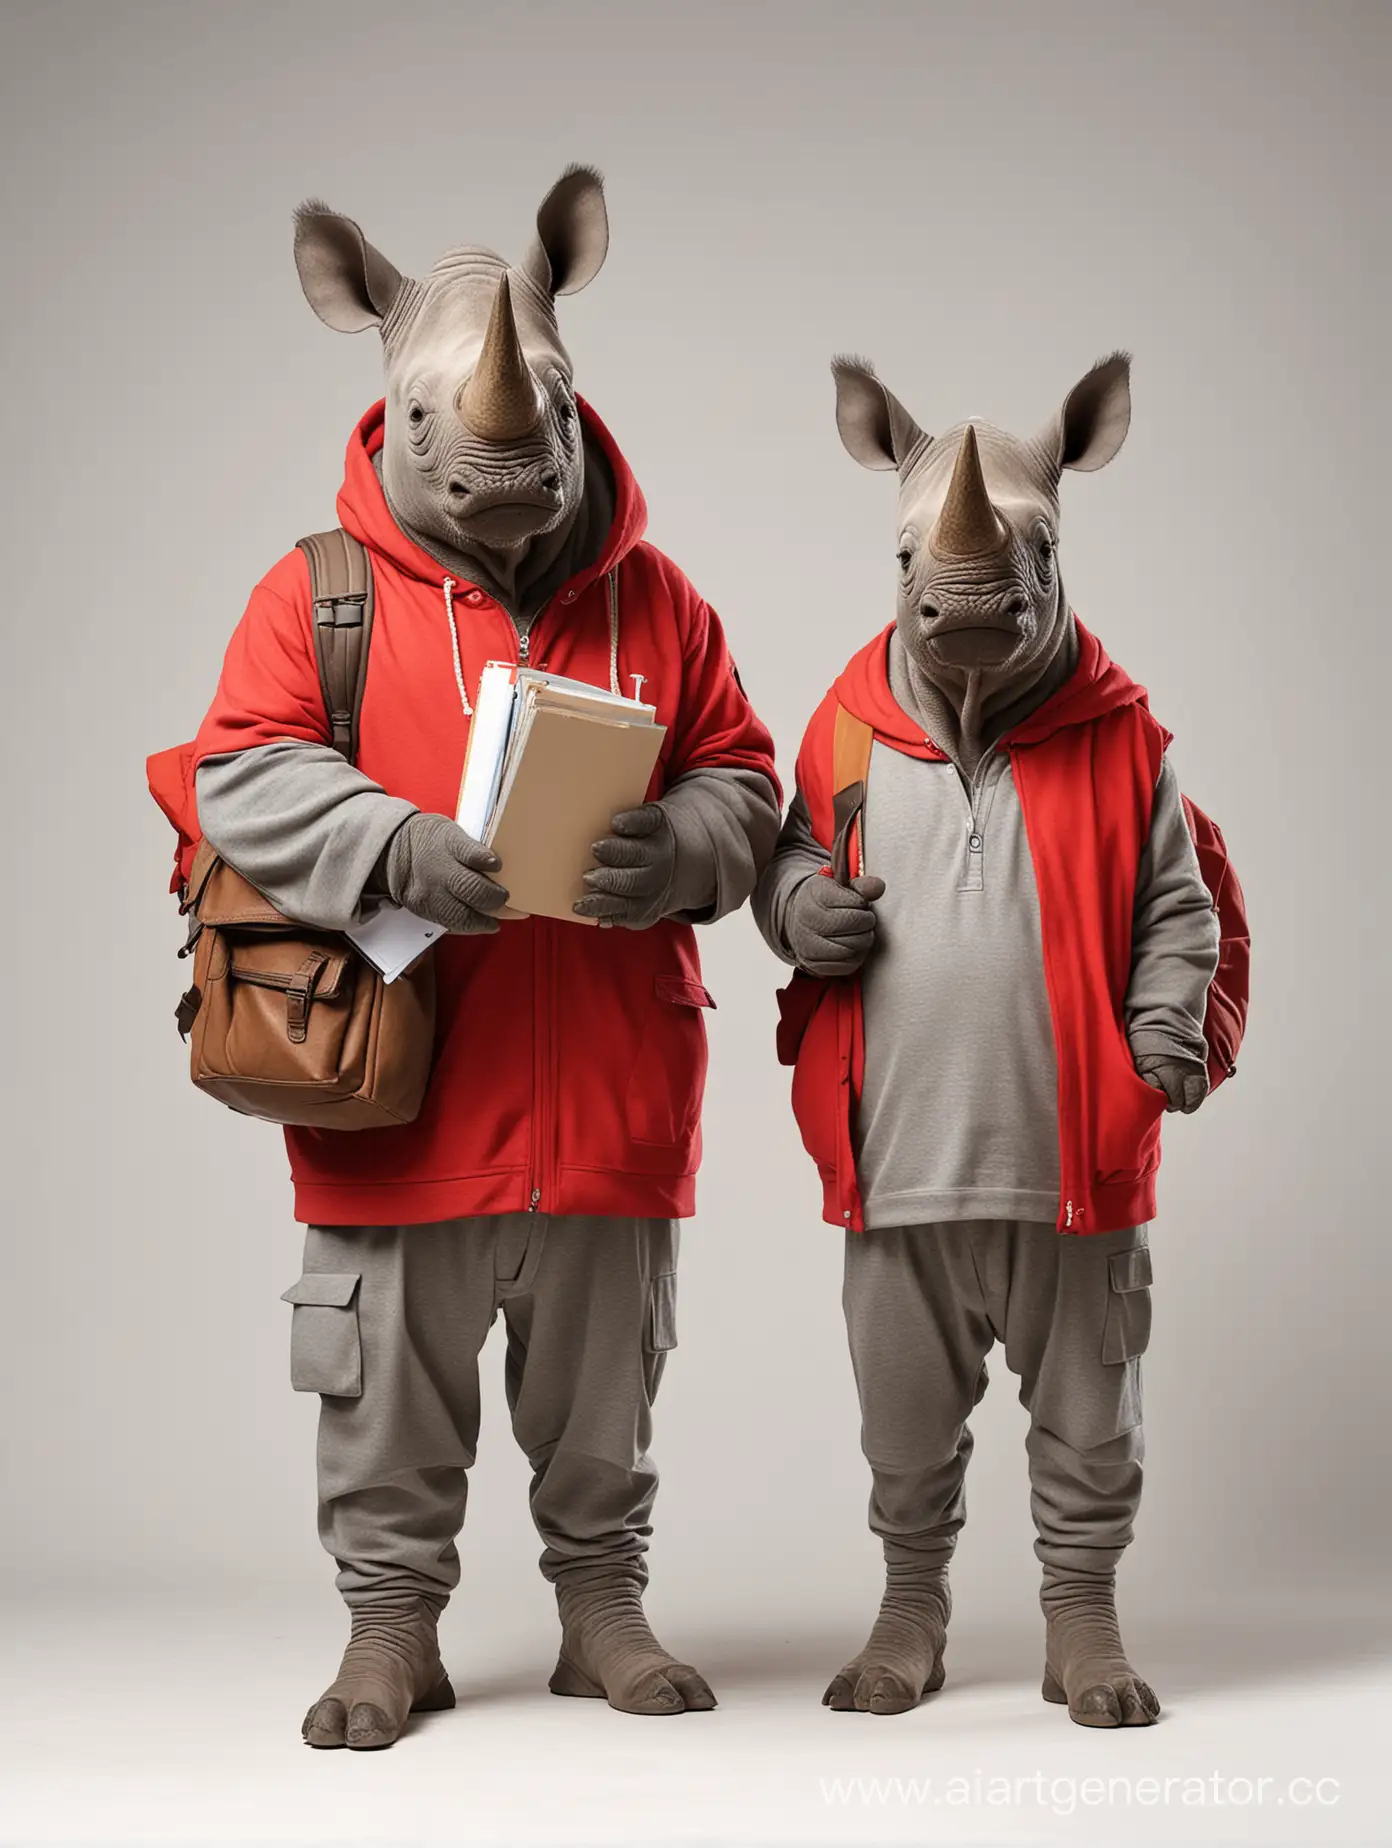 Two rhinos. The first adult rhino stands in a suit and with a folder in his hand. The second rhino is a cute little student in a red hoodie with a backpack in his hands. People who look like people are depicted on a white background